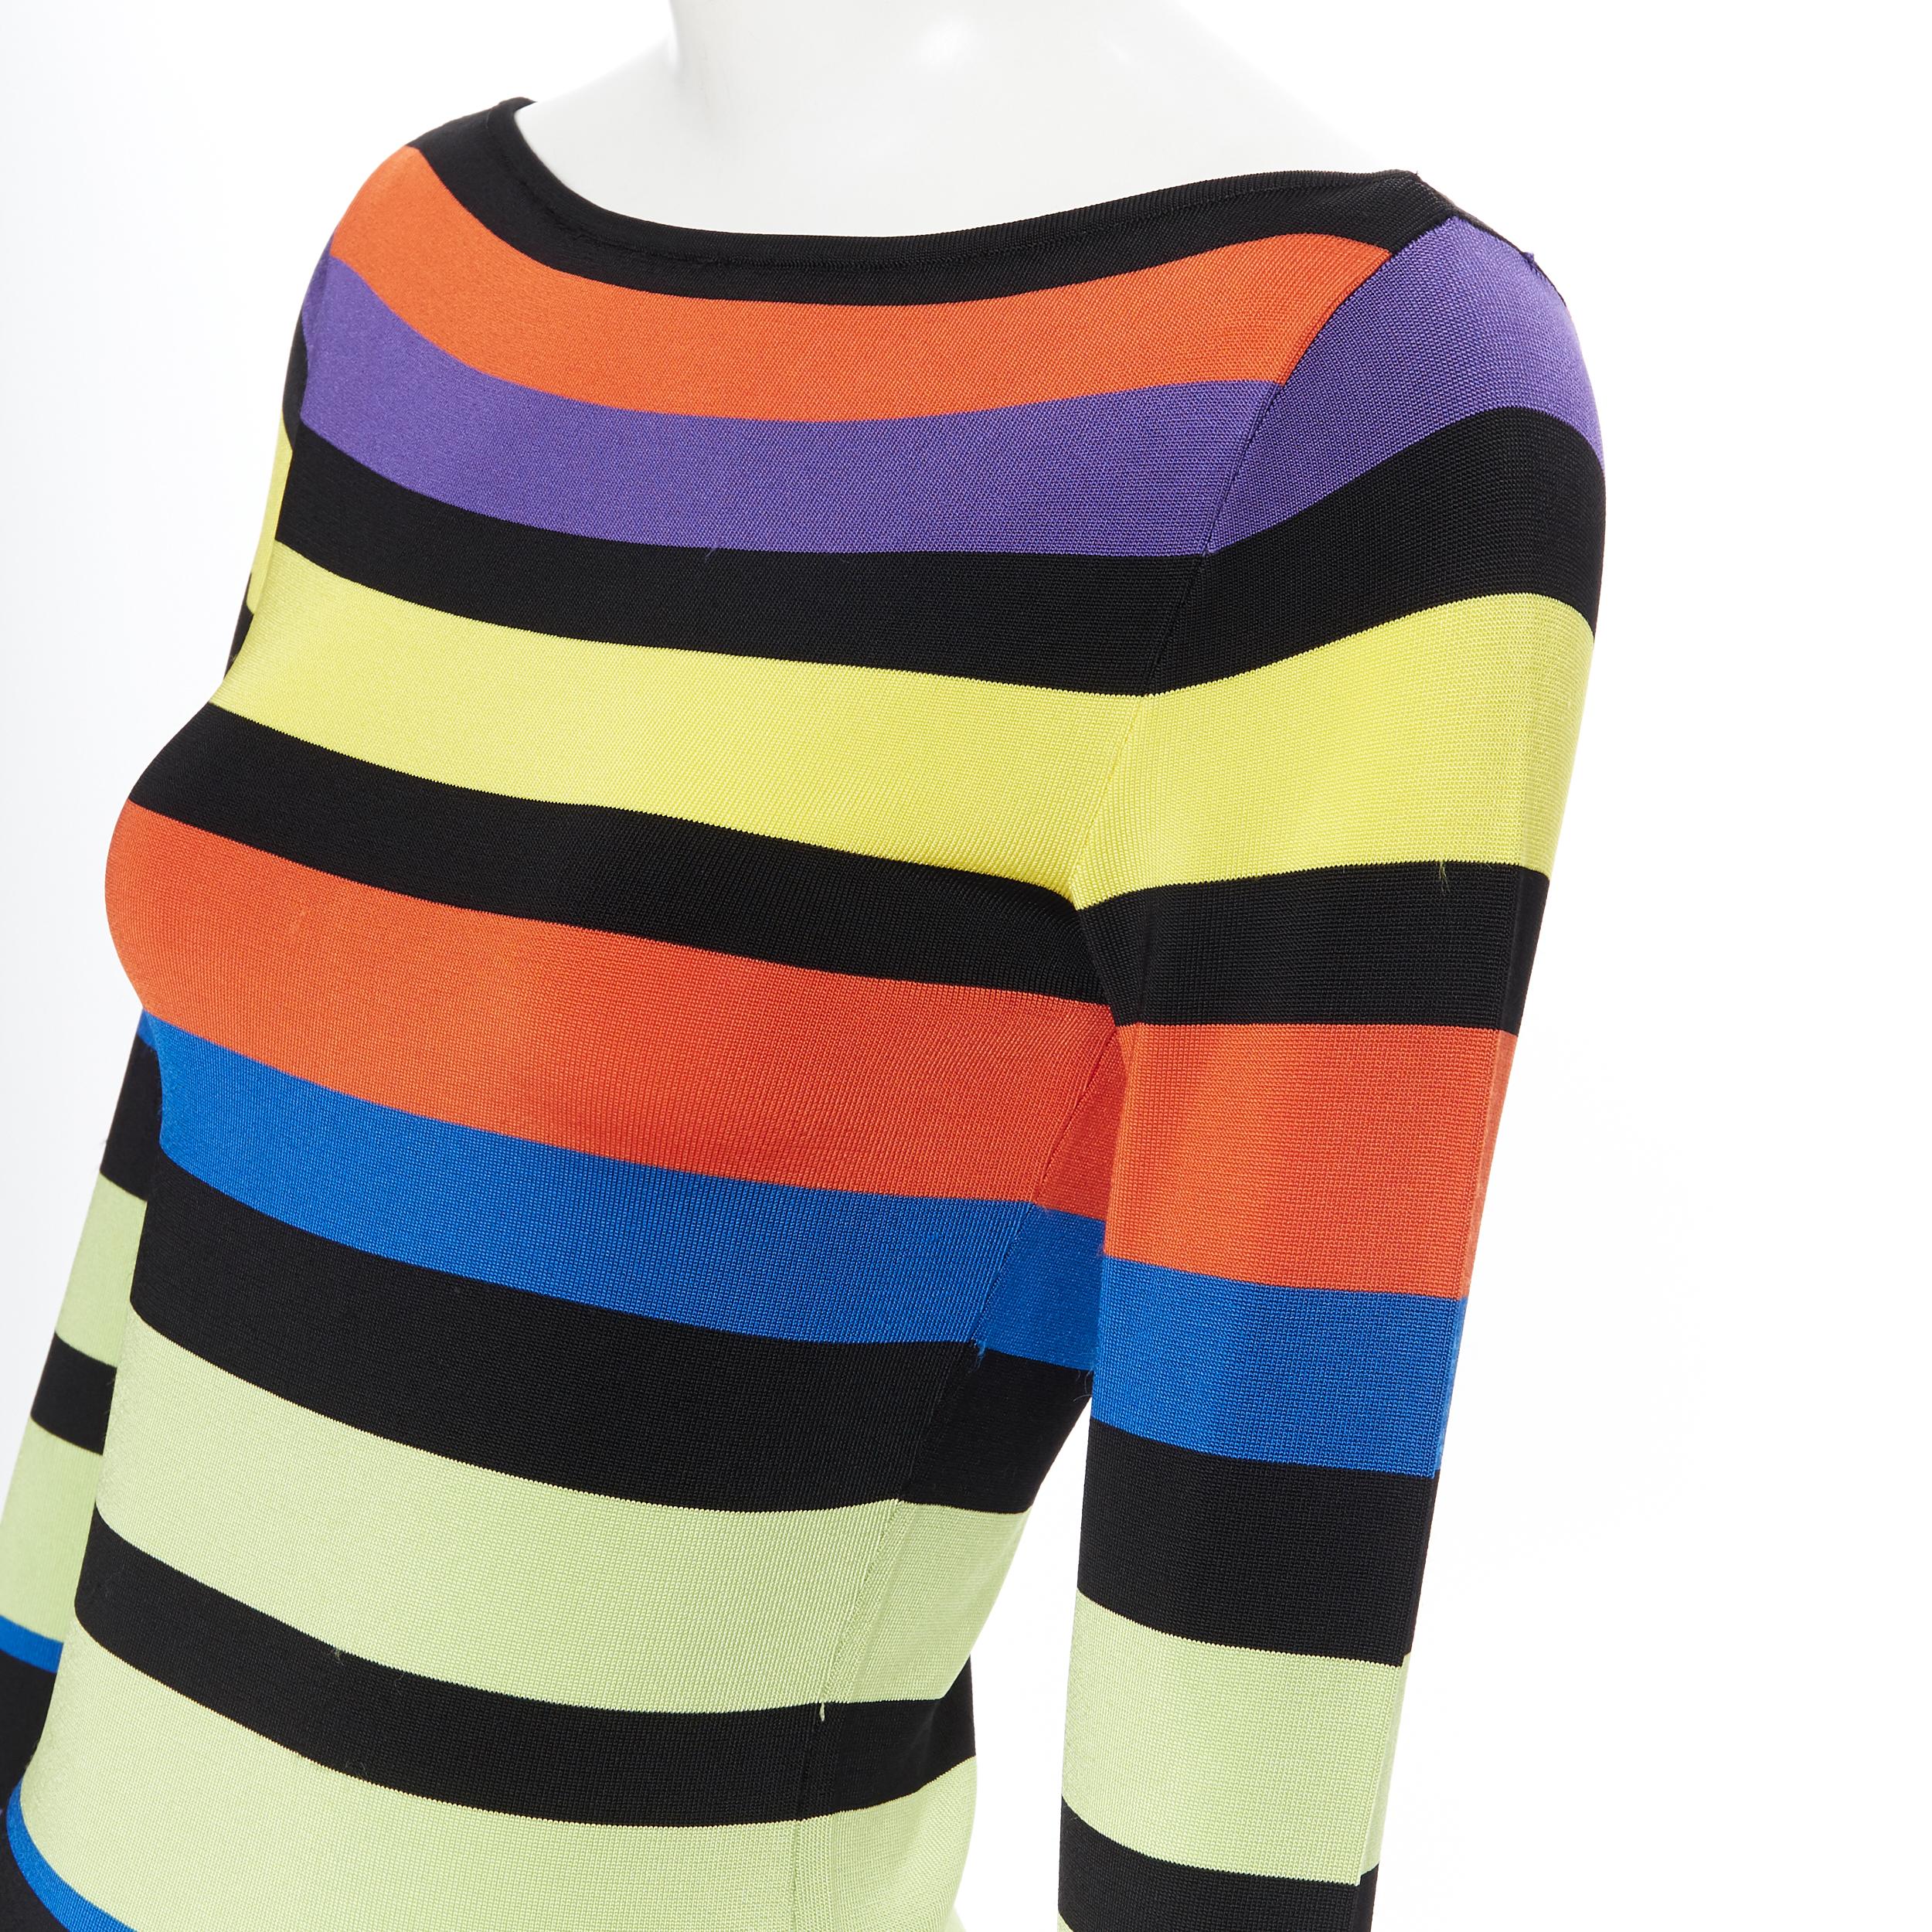 RALPH LAUREN multicolour striped viscose boat neck long sleeve sweater top XS 
Reference: LNKO/A01523 
Brand: Ralph Lauren 
Material: Viscose 
Color: Multicolour 
Pattern: Striped 
Extra Detail: Viscose knit. Boat neck. Multi-coloured stripe. 
Made